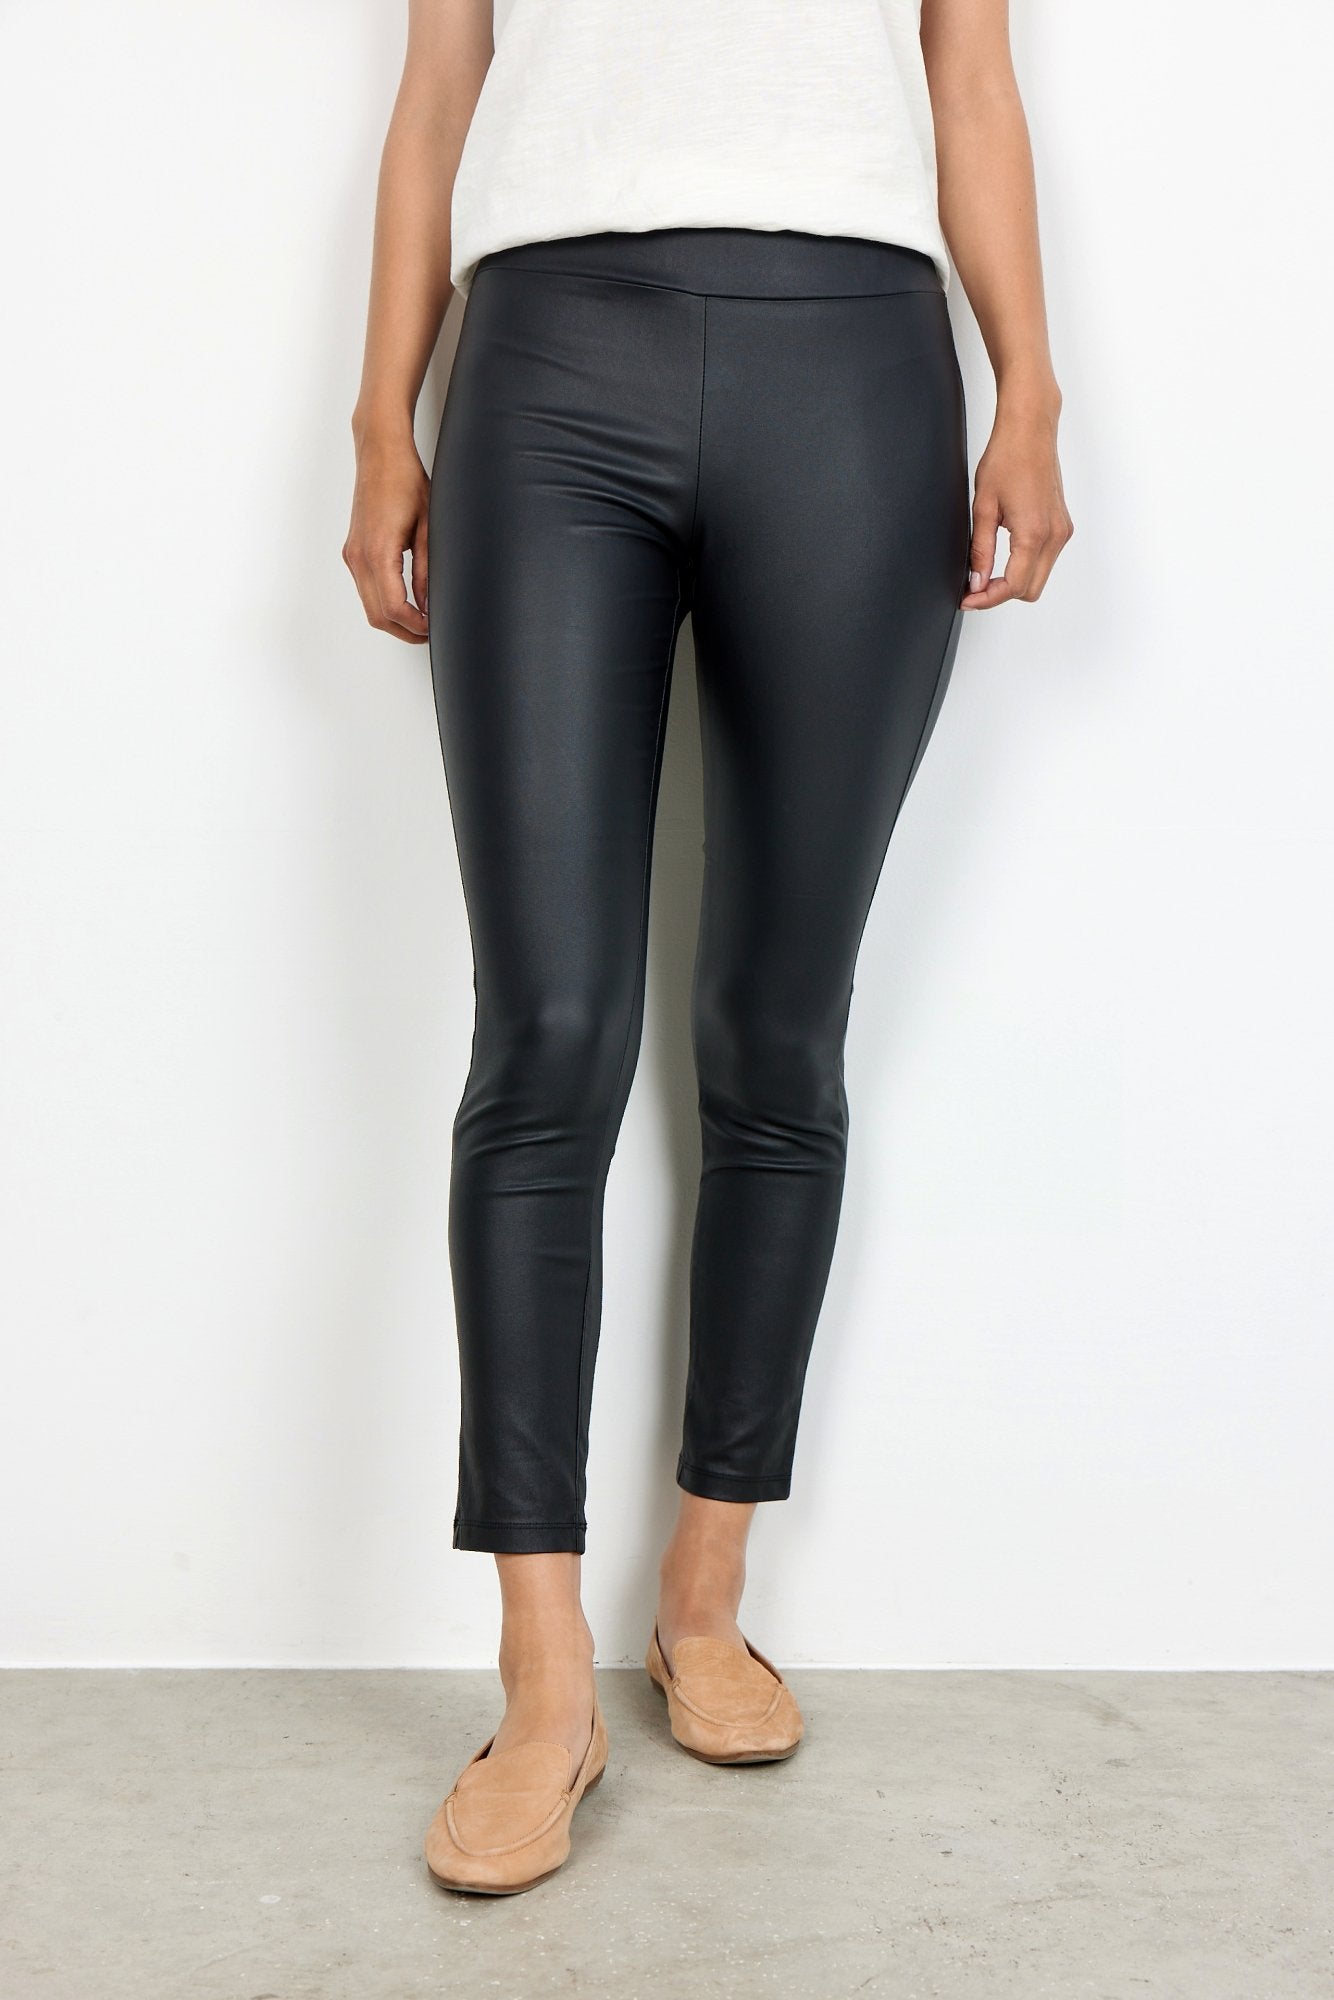 SC-PAM 2-B Pants in Black from soyaconcept | Soyaconcept – soyaconcept